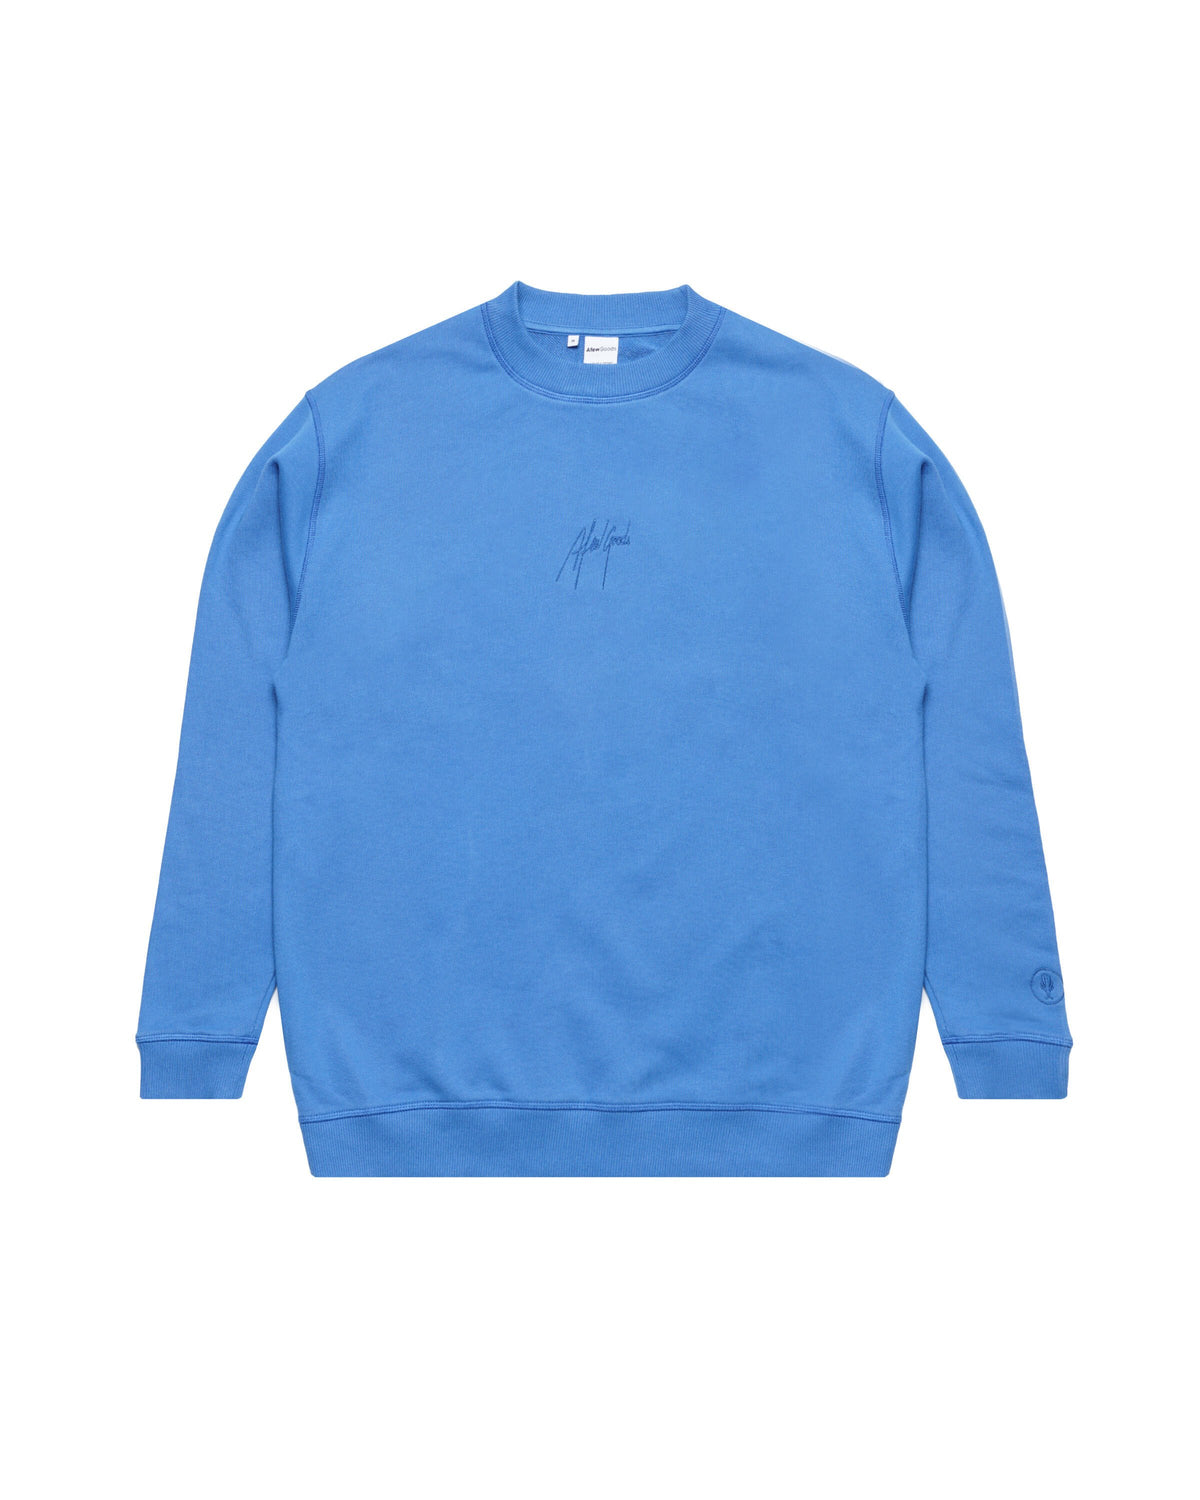 Afew Goods Made by Culture Sweater "Bright Cobalt"